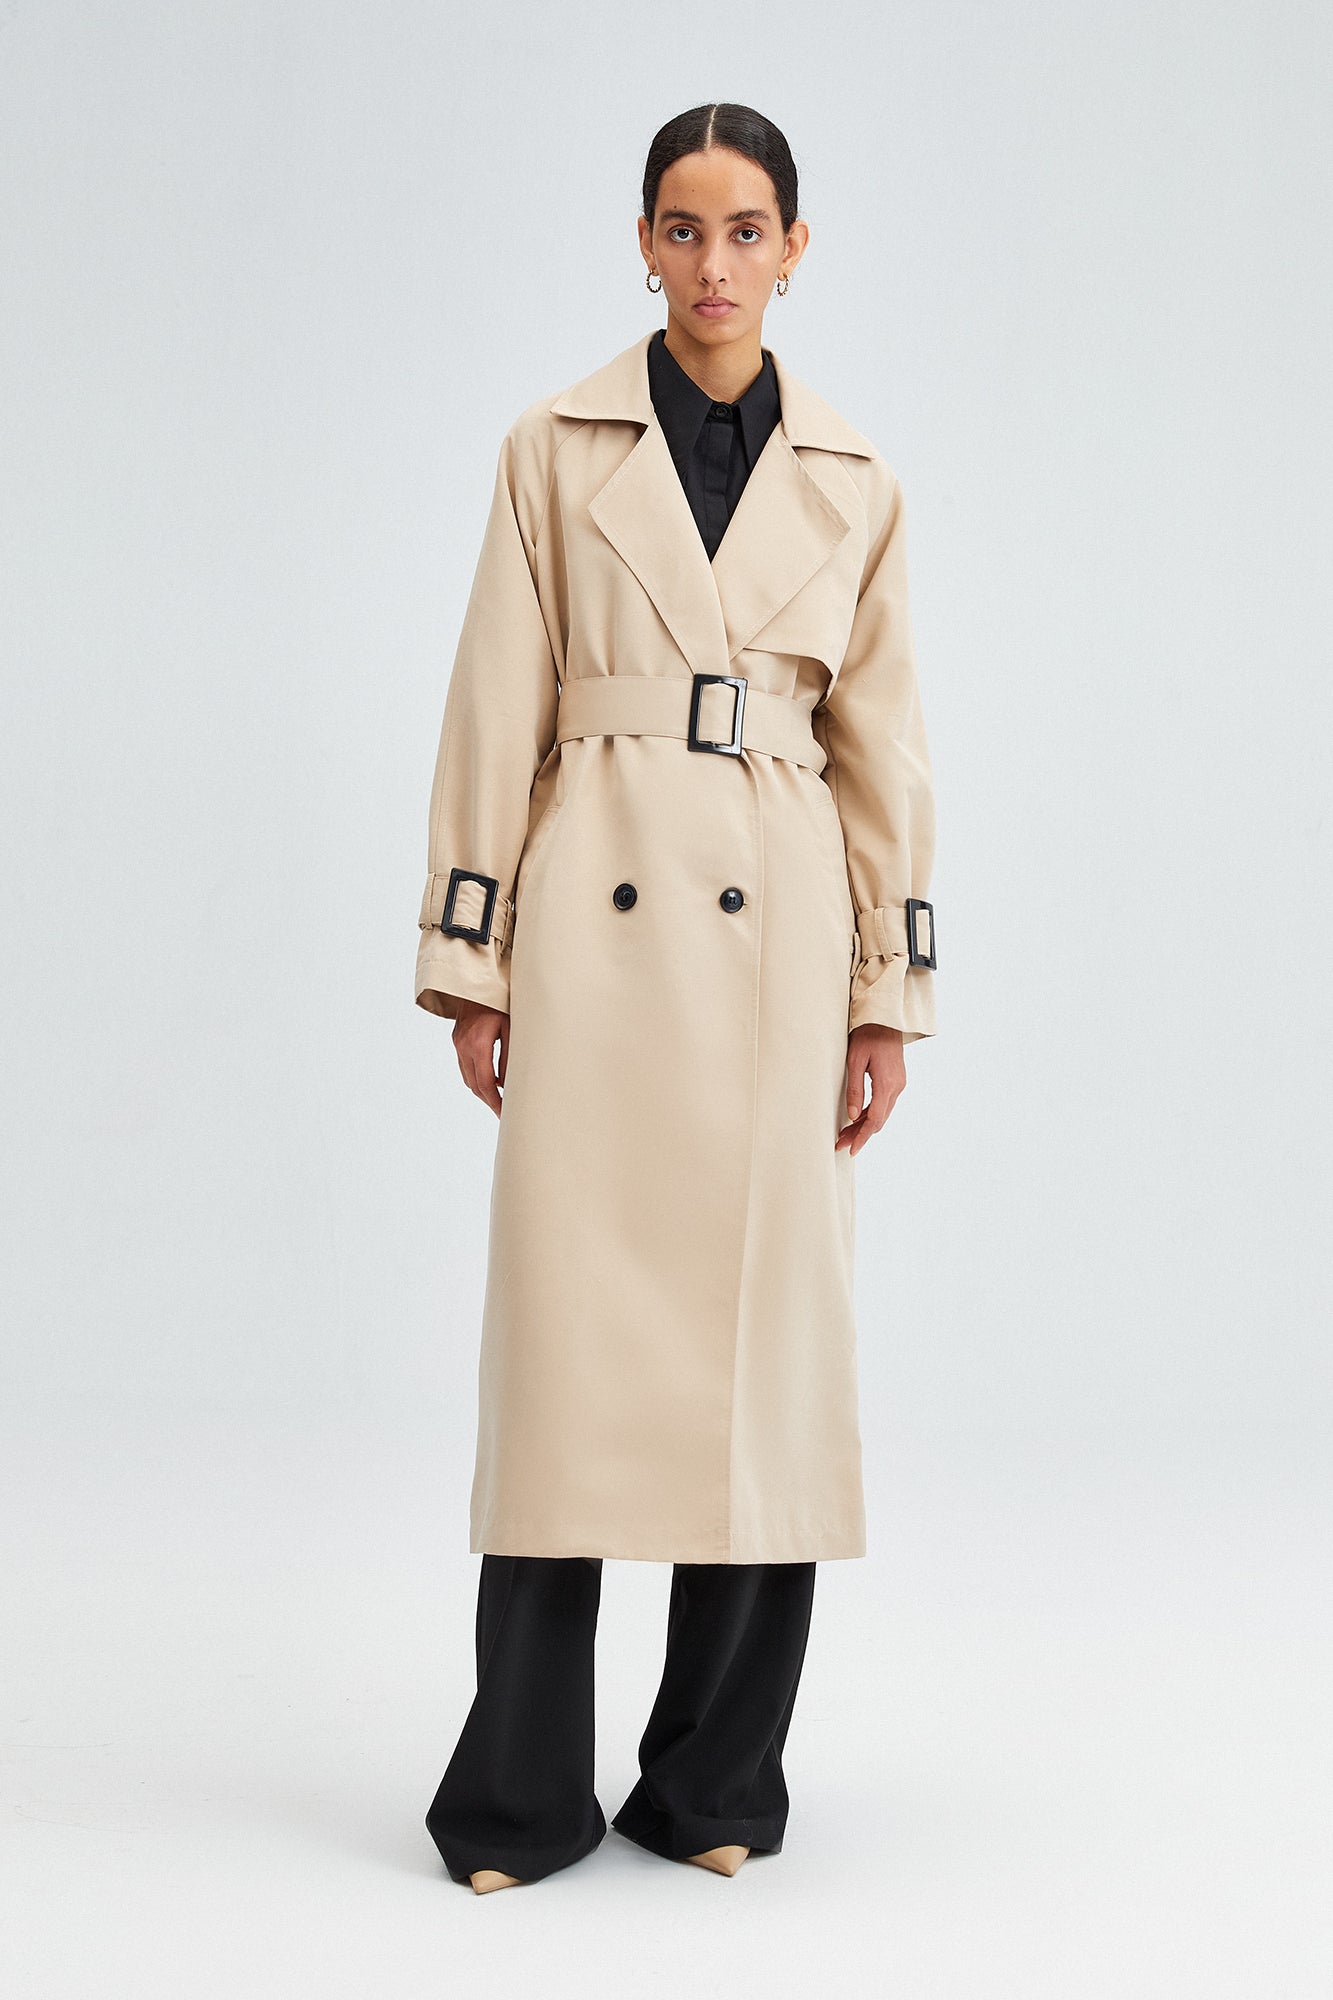 A wholesale clothing model wears Oversize Trench Coat - Stone, Turkish wholesale Trenchcoat of Touche Prive